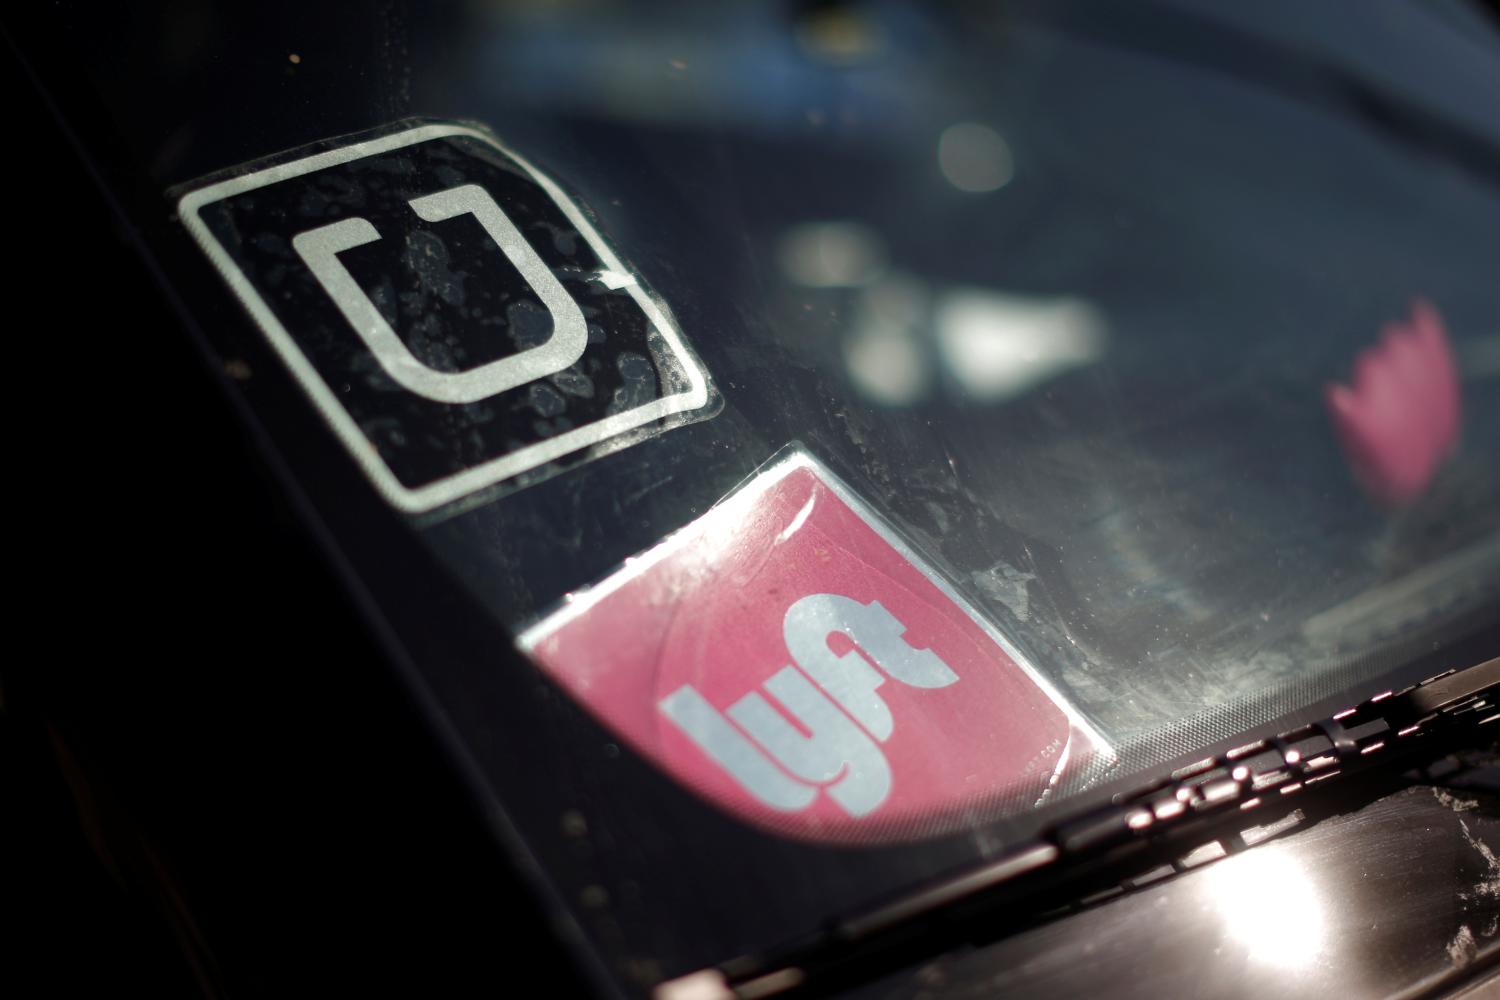 The corporate logos of Uber and Lyft are displayed on a driver's windshield.